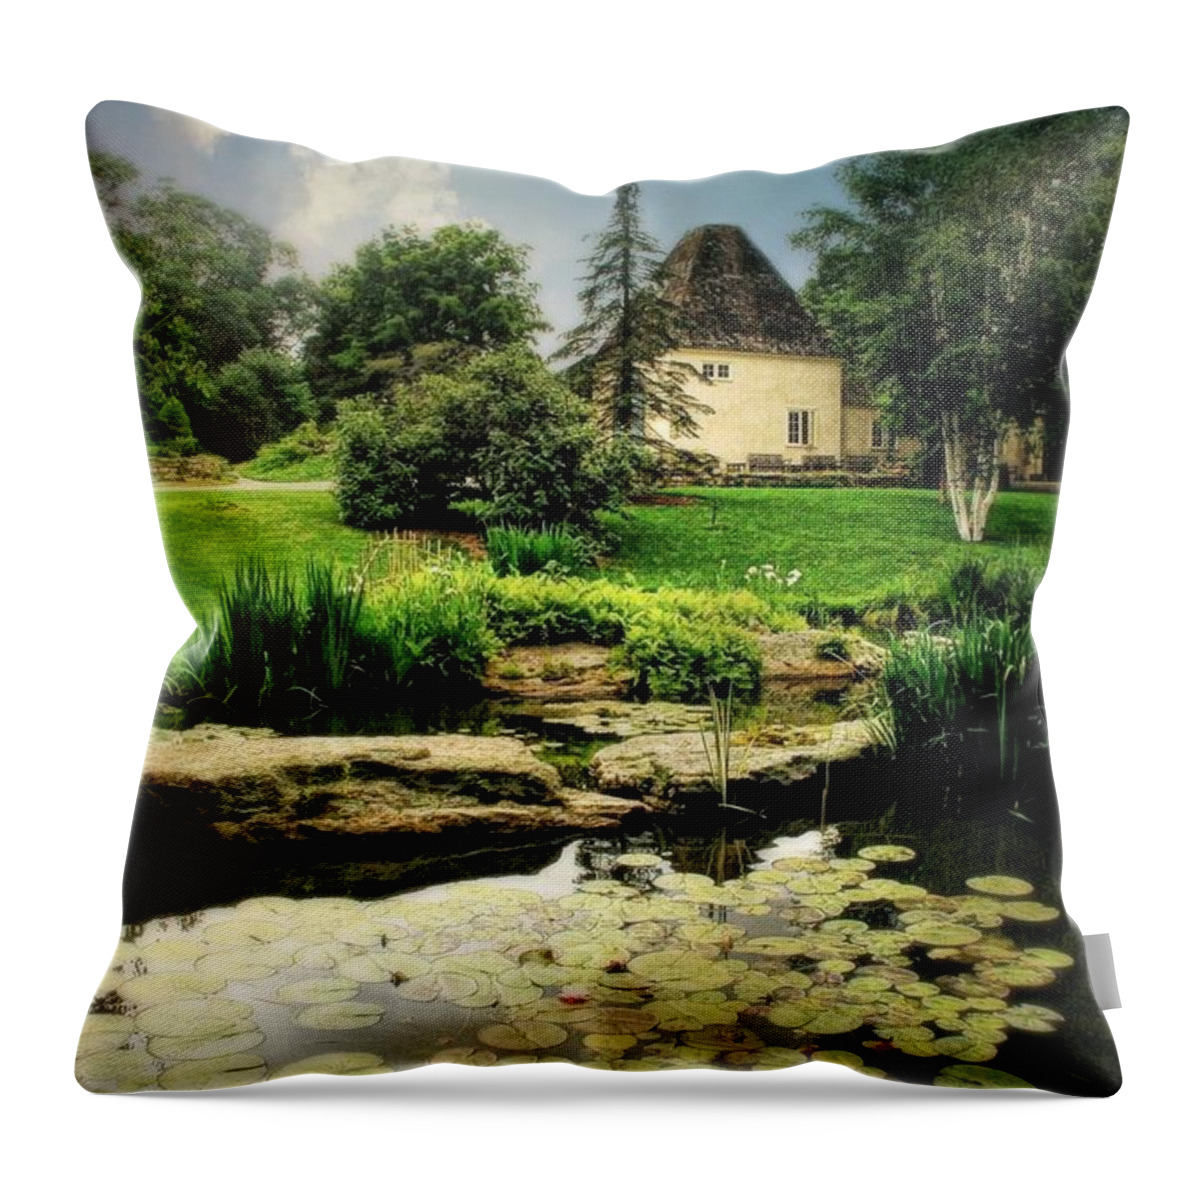 Landscape Throw Pillow featuring the photograph Stone Crop Gardens by Diana Angstadt